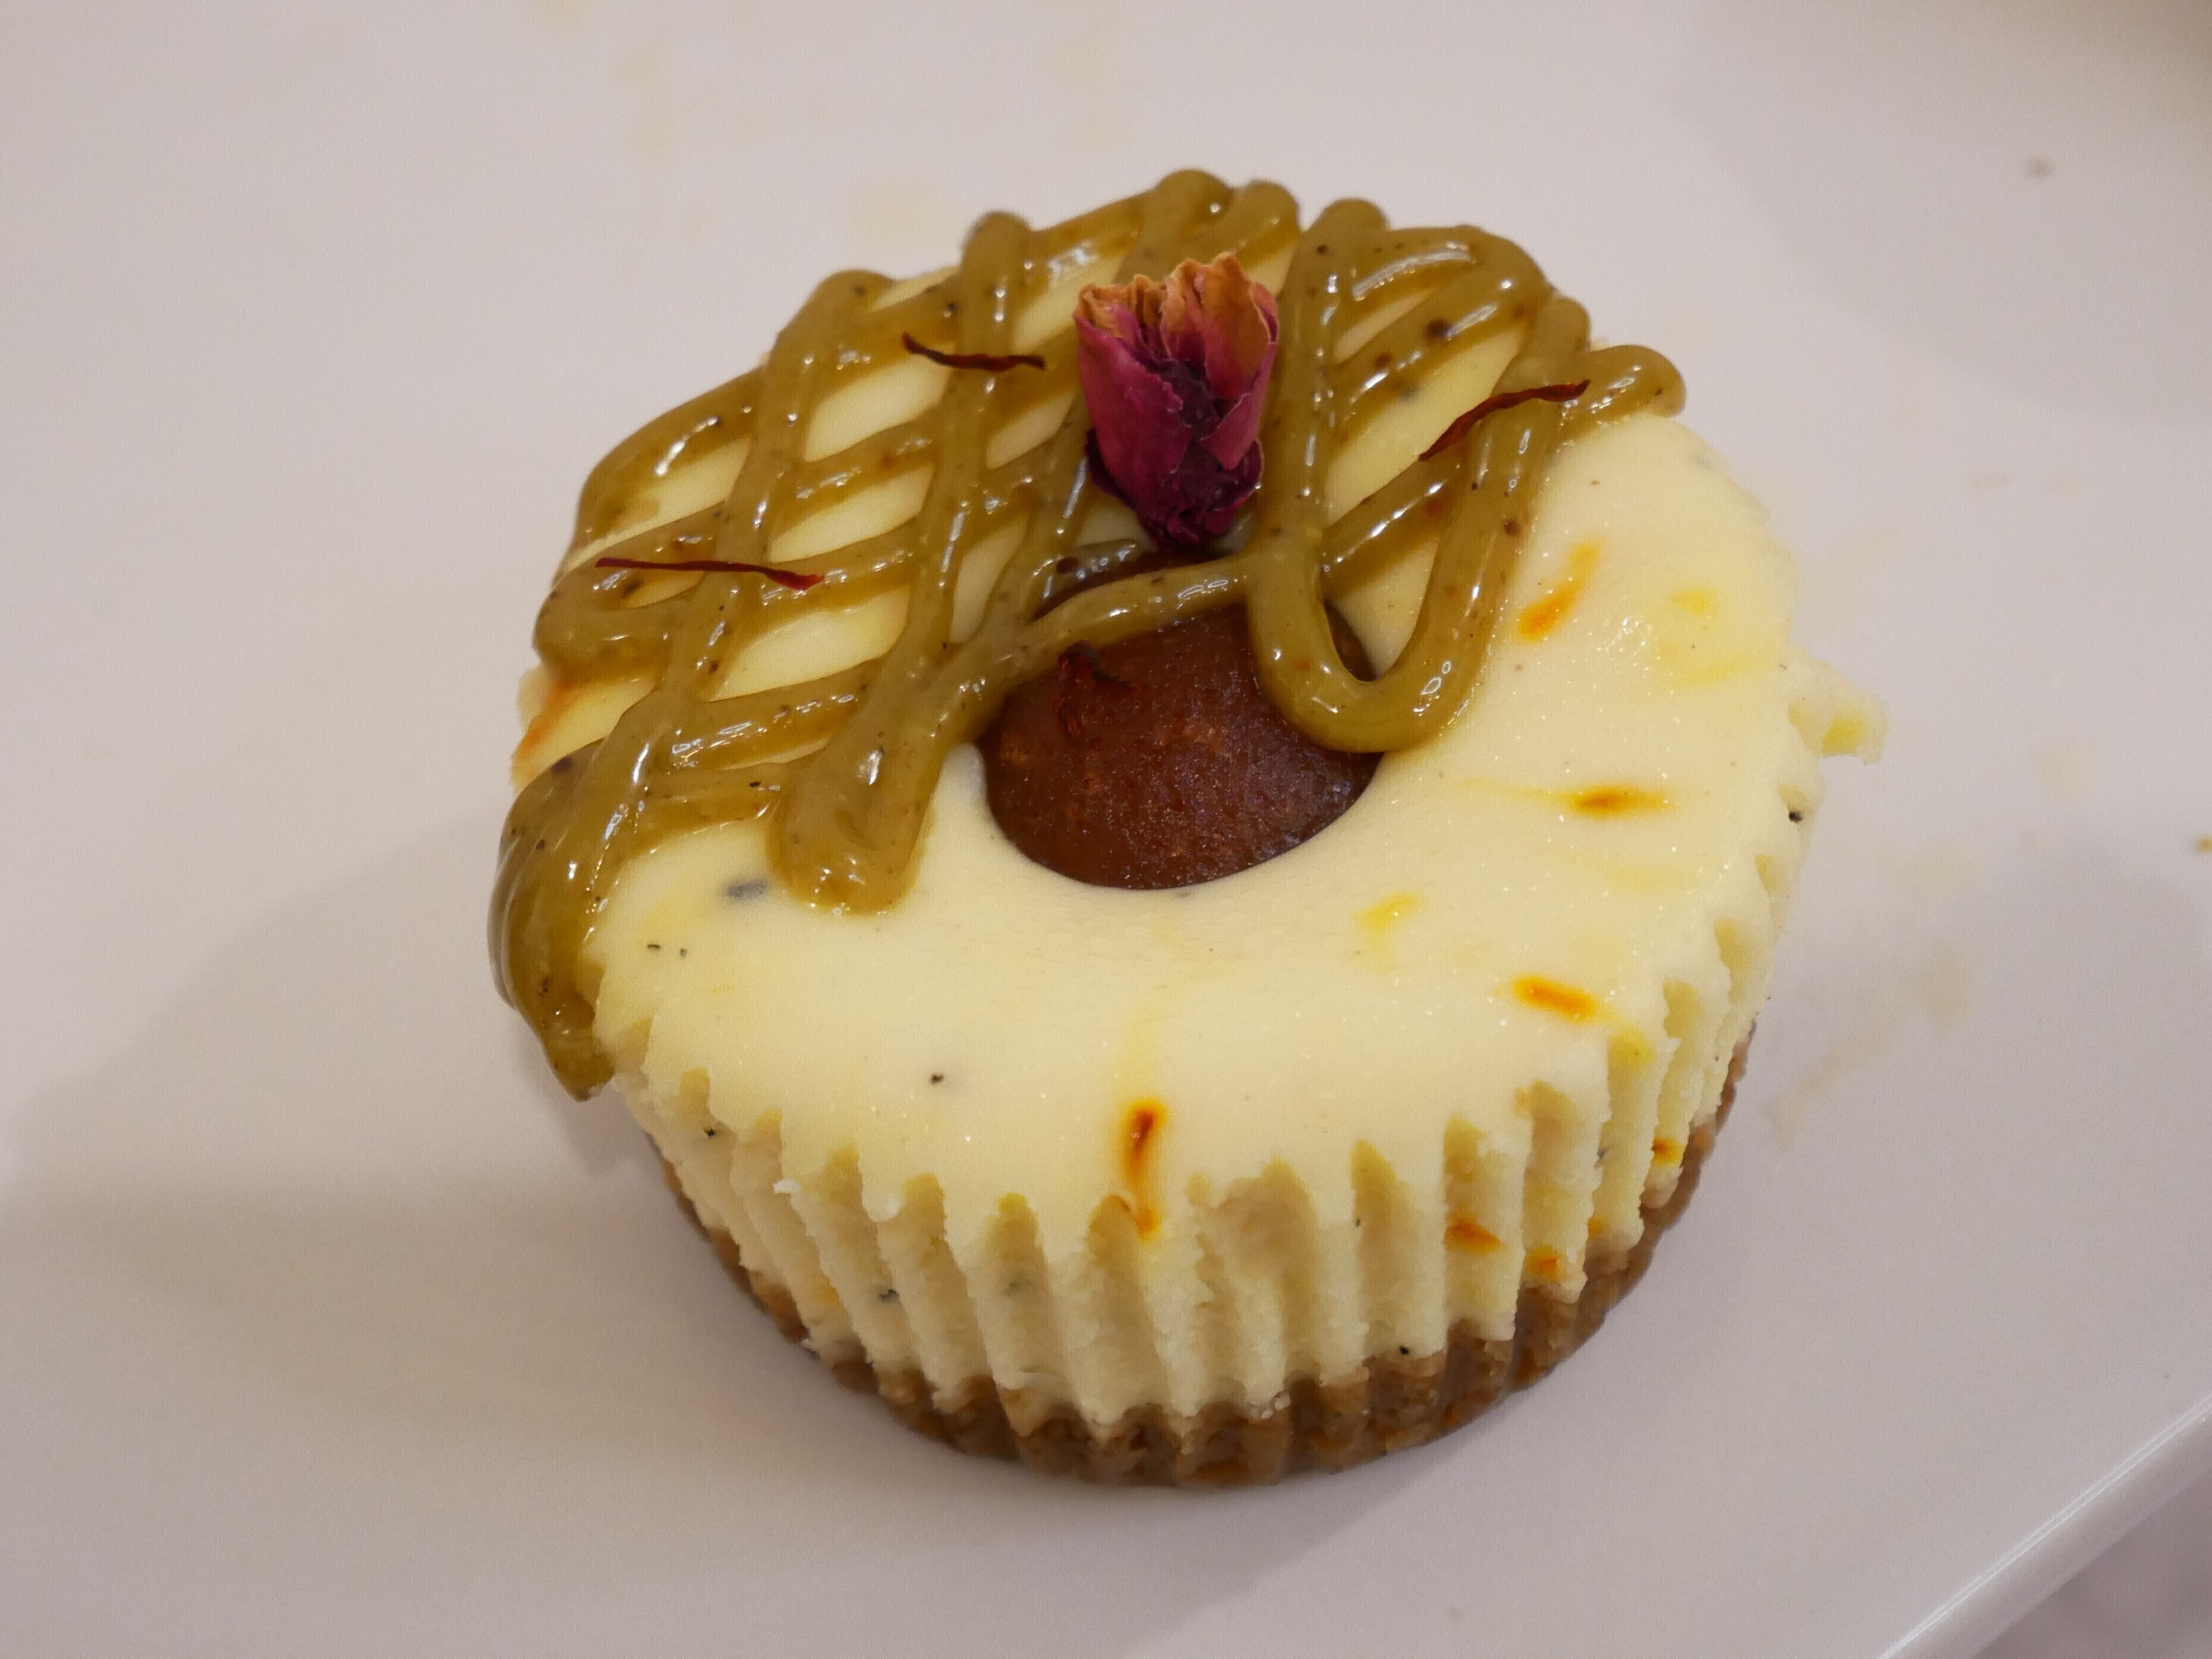 Gulab jamun mini-cheesecake cupcake topped with caramel, and a decorative flower.